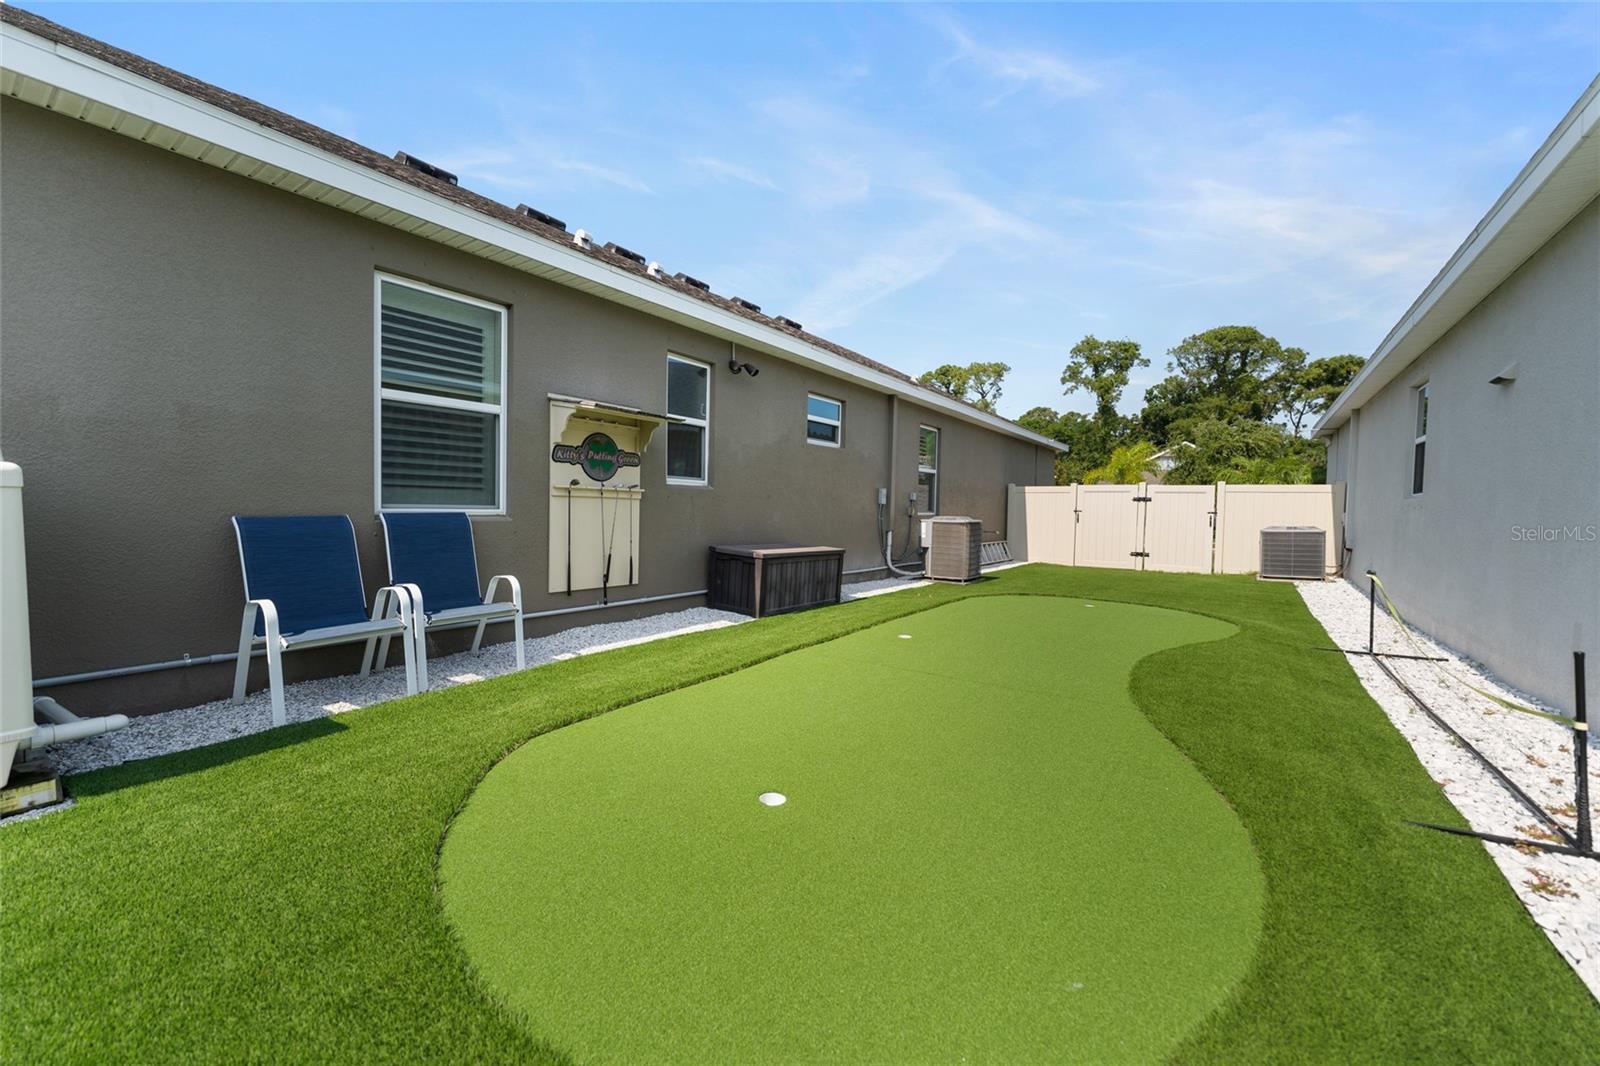 Putting green between houses. Fence can be installed.